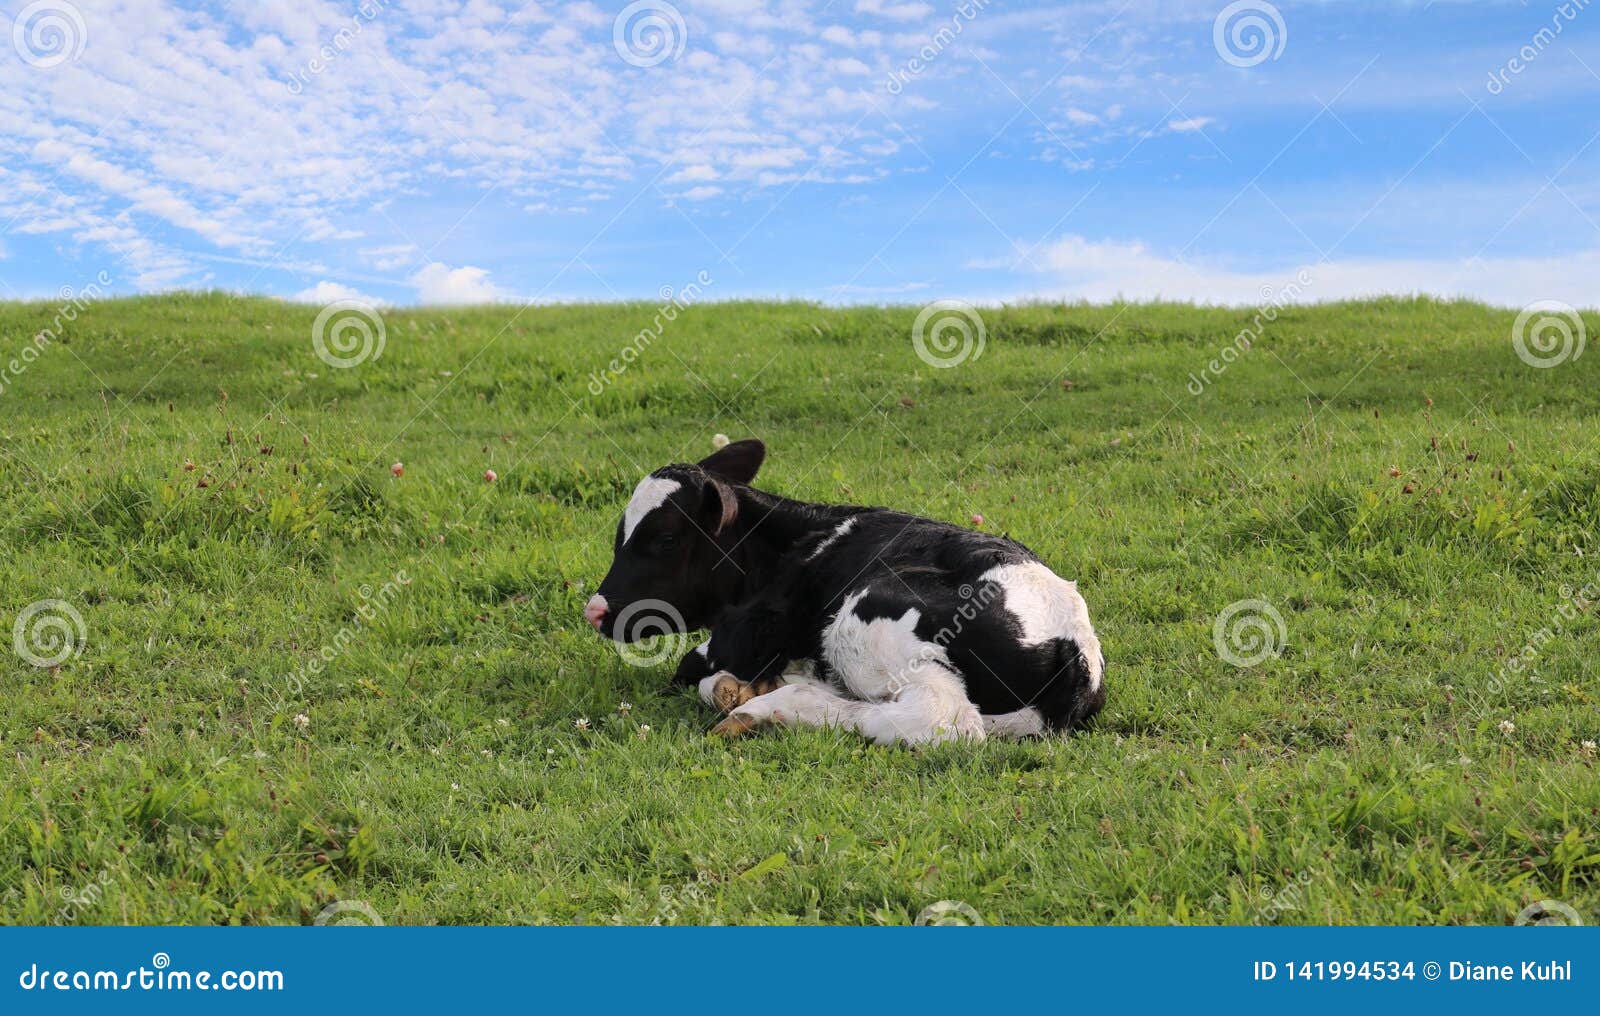 Tiny Black and White New Calf Alone in the Field Stock Photo - Image of ...